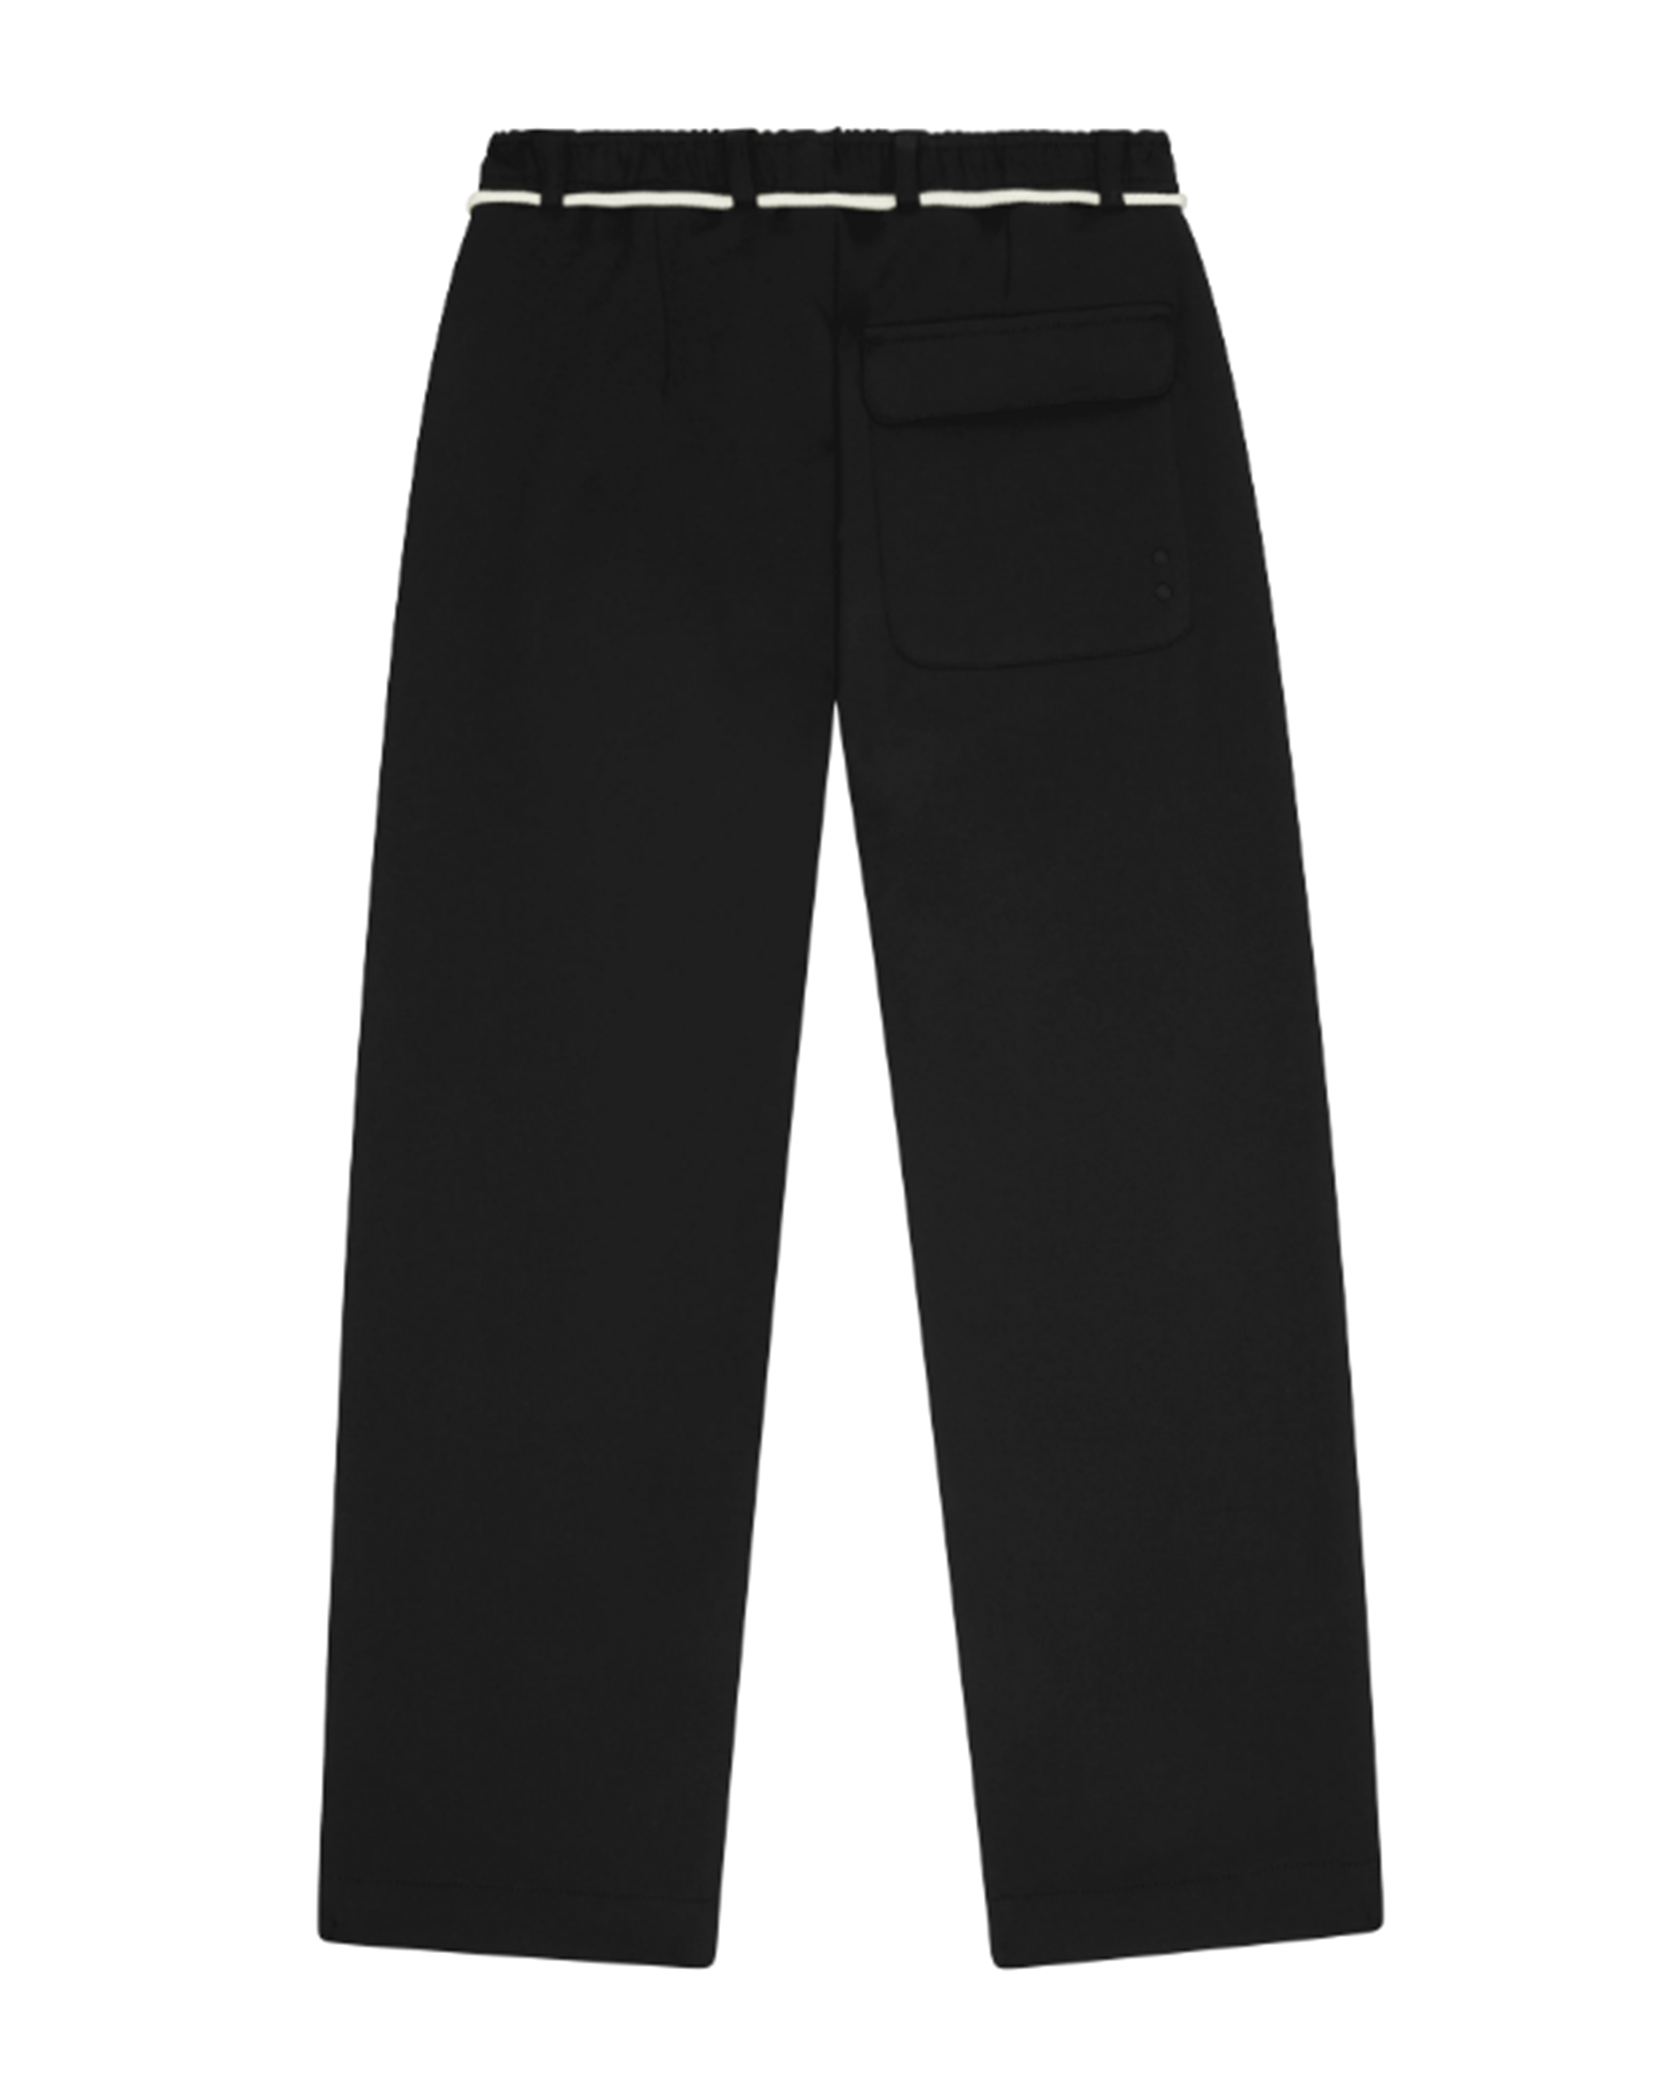 About blank - cropped trousers black